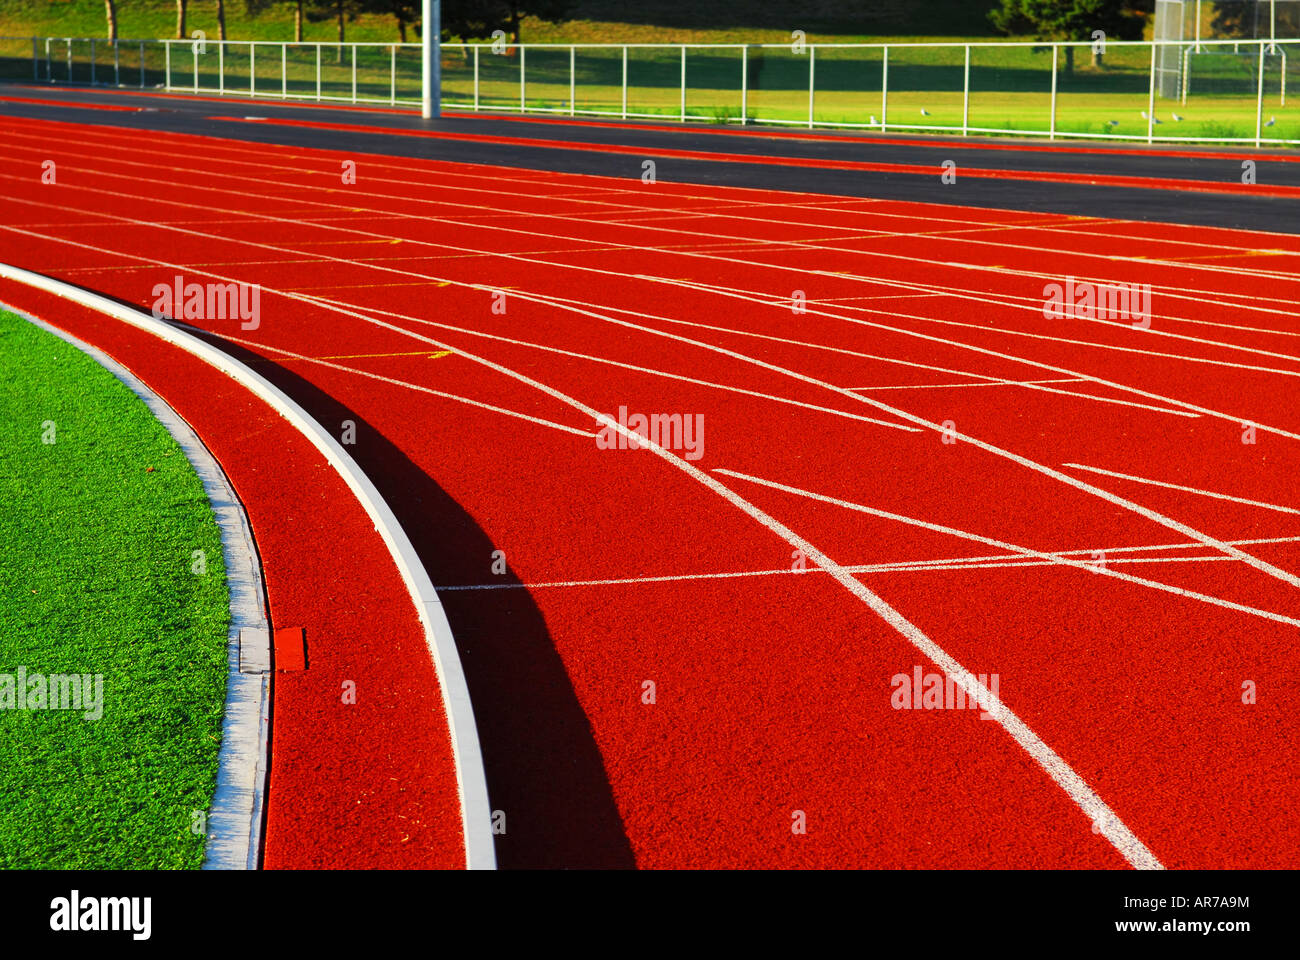 Curving lanes of a red racetrack in a stadium Stock Photo